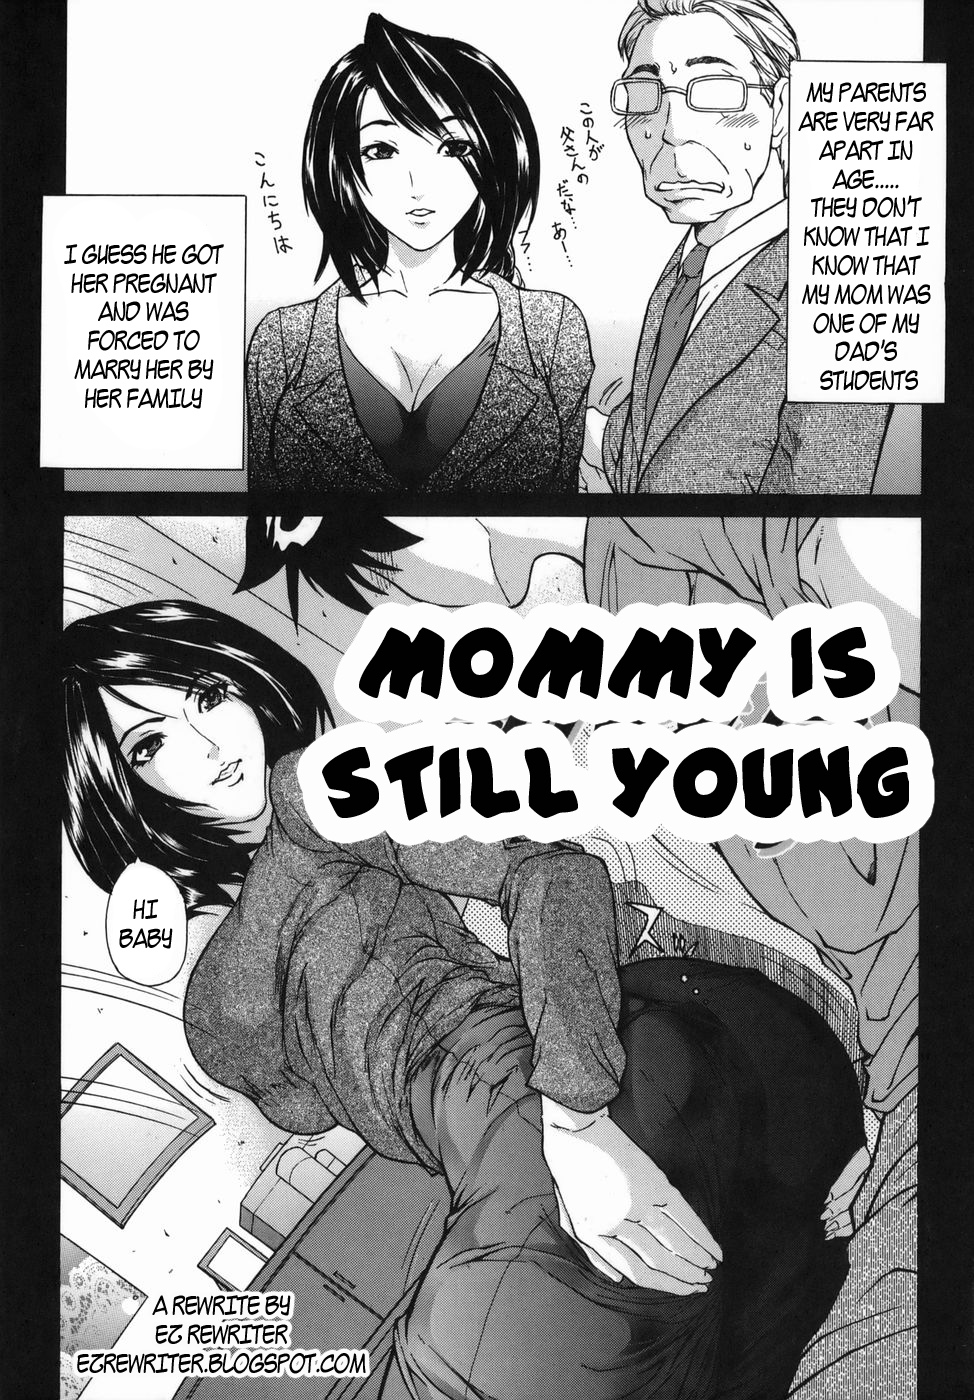 Mommy is still young (rewrite by ezrewriter) 